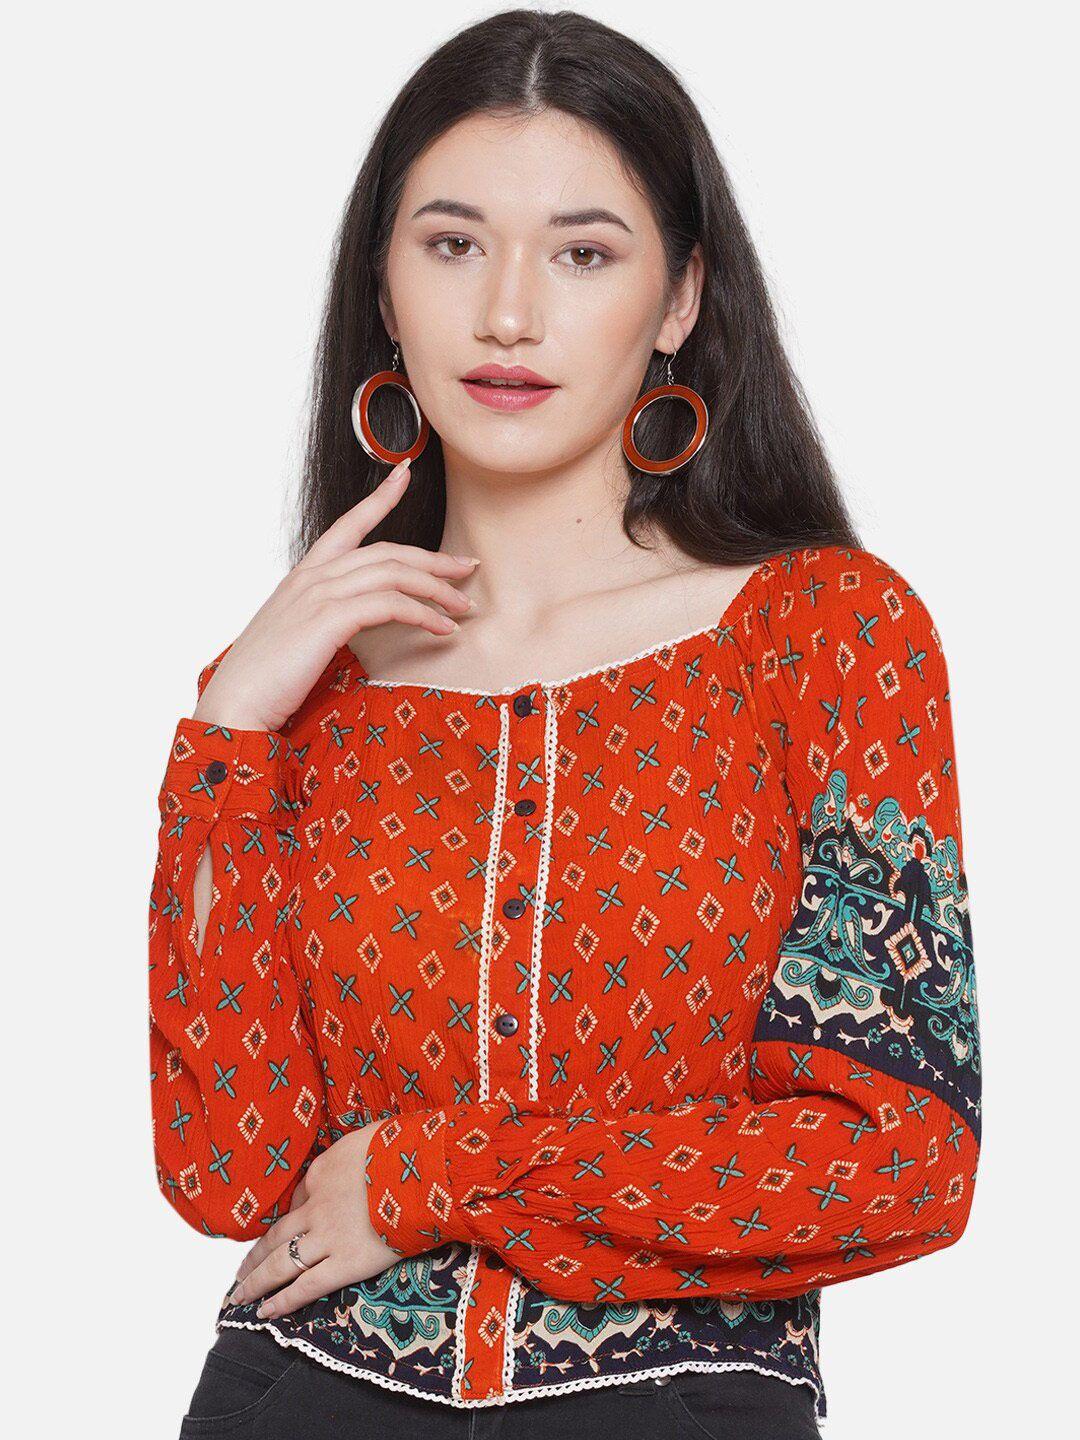 bellamia ethnic motifs printed square neck cuffed sleeves shirt style top